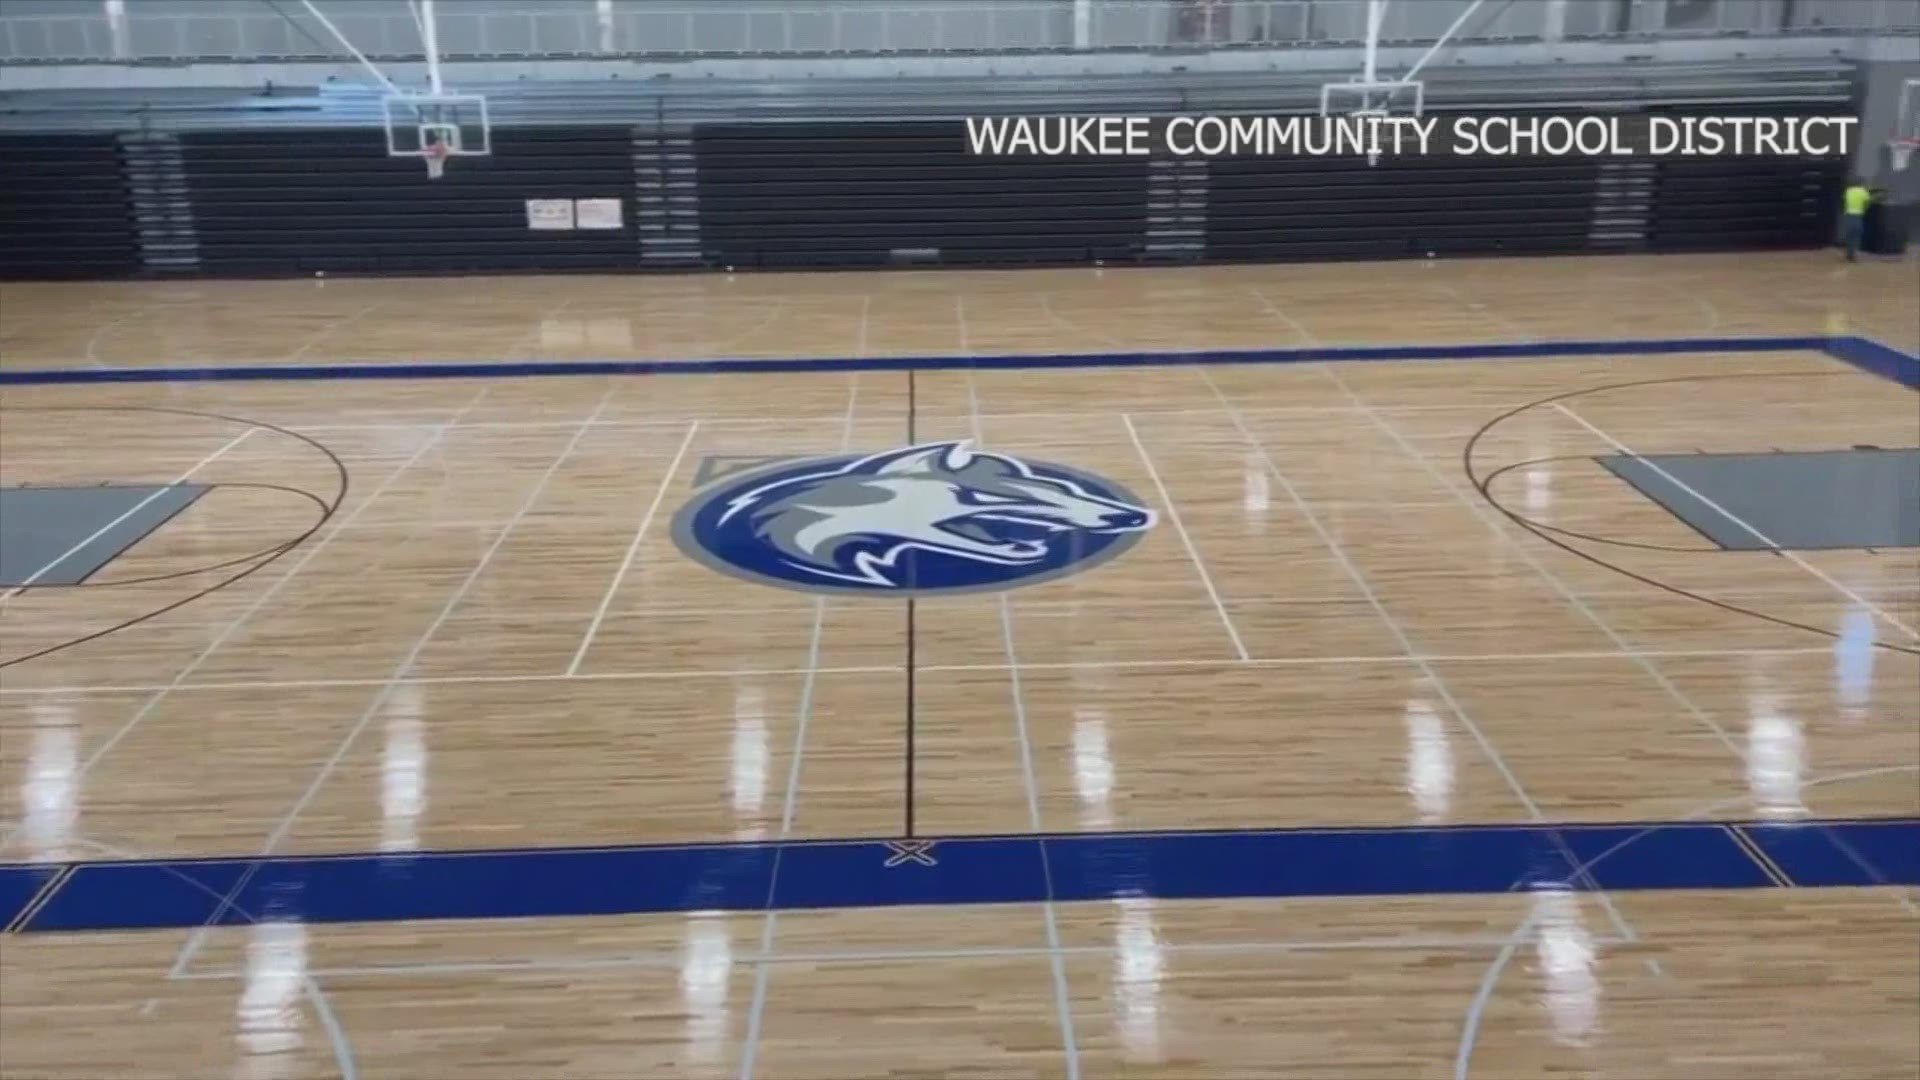 Administrators highlighted how the athletic facilities are coming along in a social media post on Monday.